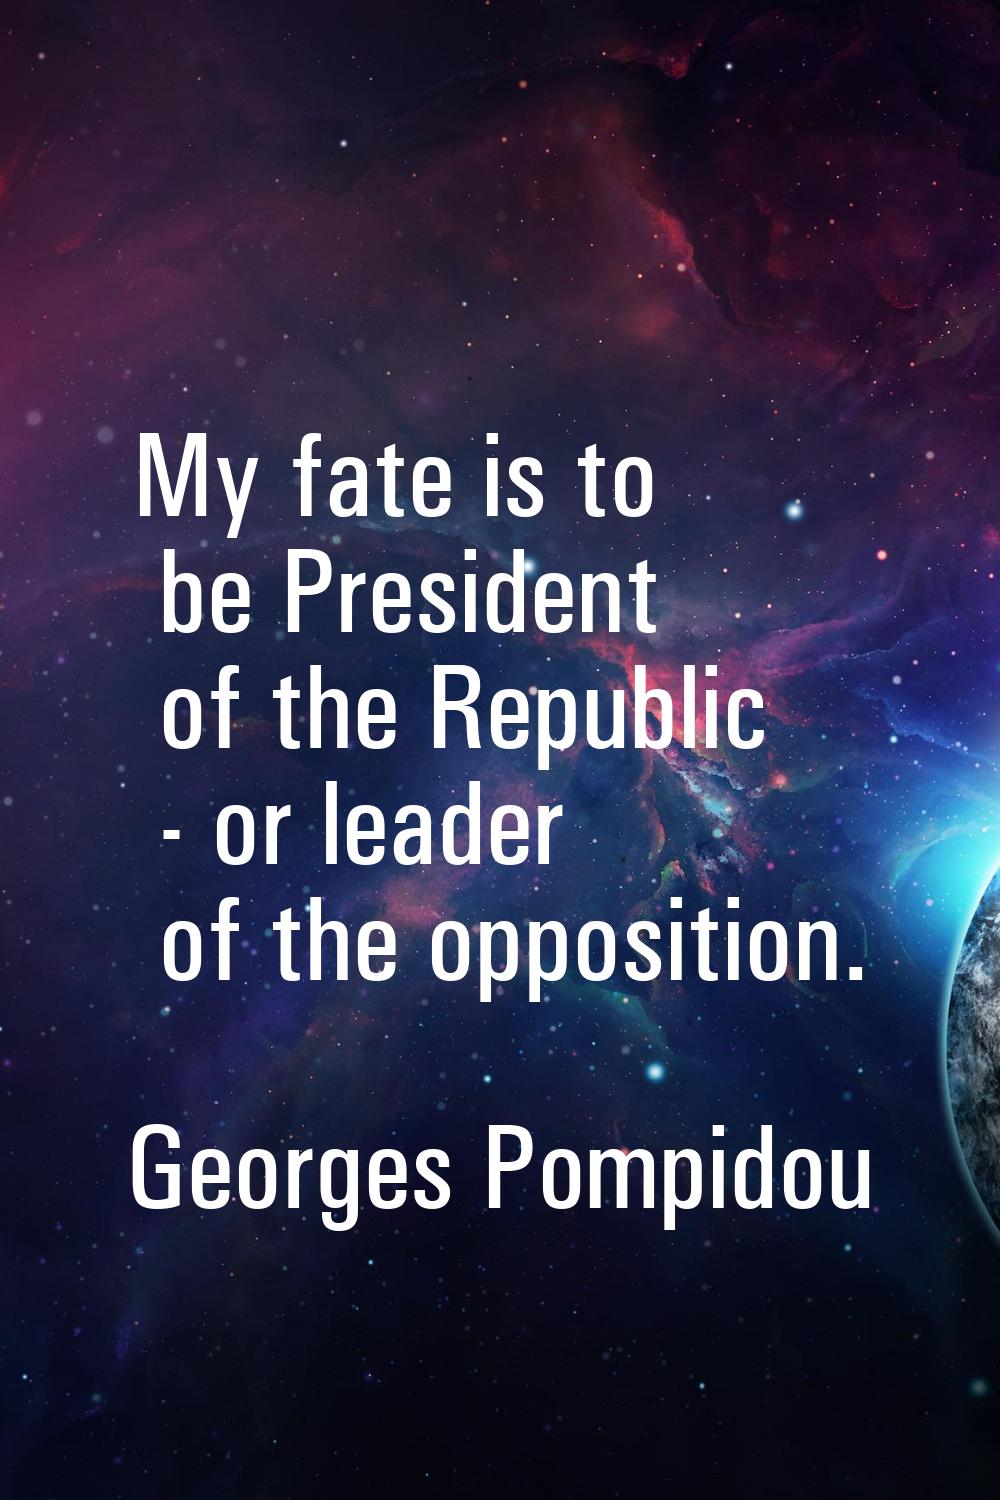 My fate is to be President of the Republic - or leader of the opposition.